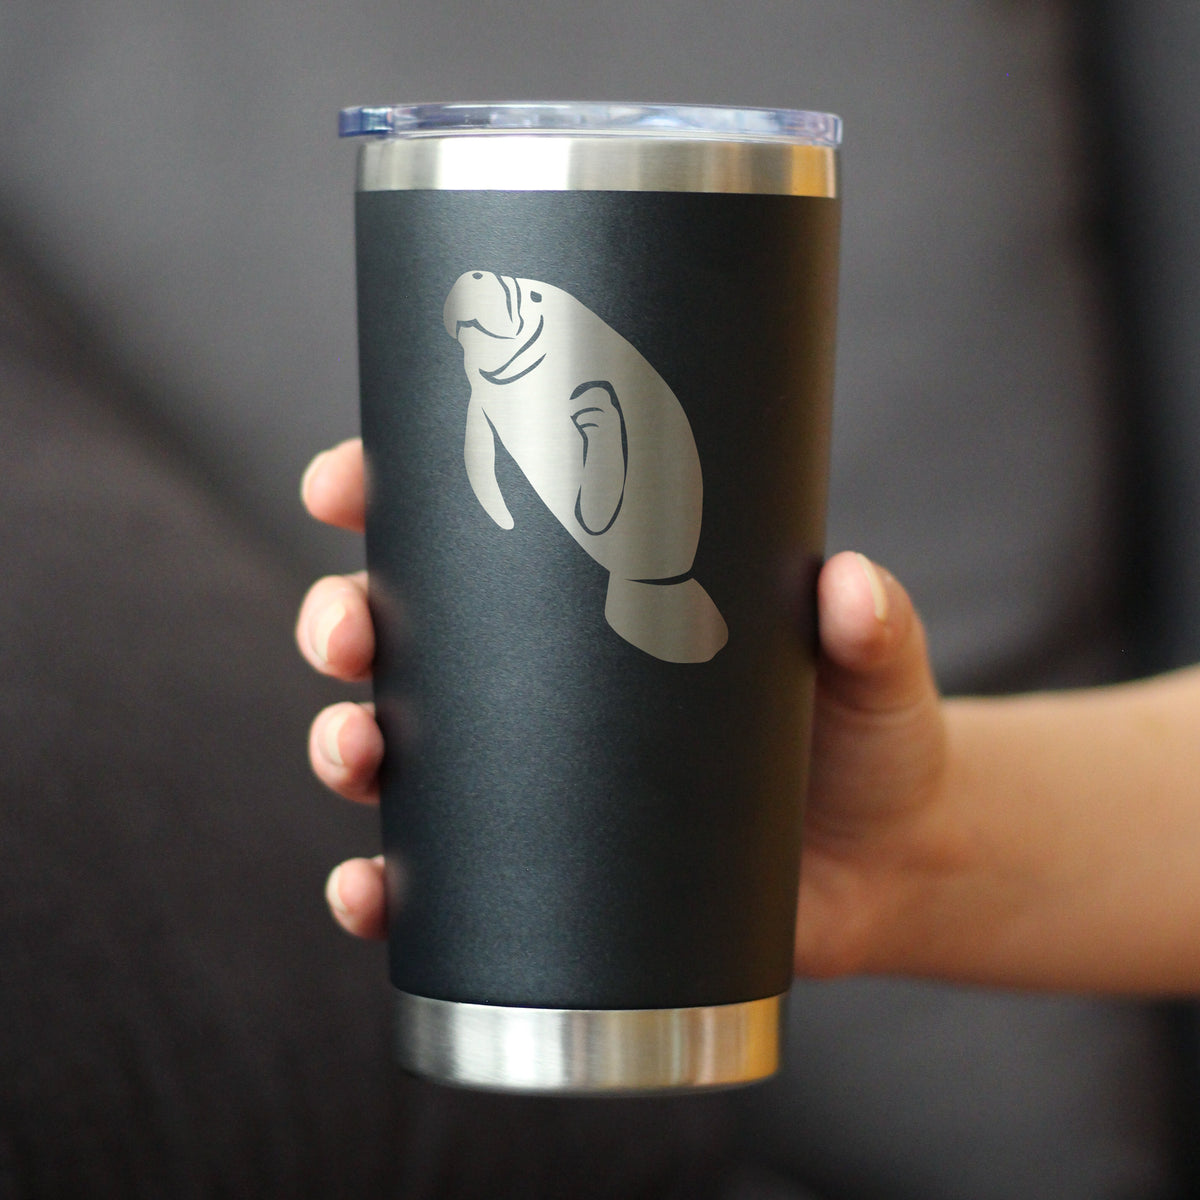 Manatee - Insulated Coffee Tumbler Cup with Sliding Lid - Stainless Steel Travel Mug - Manatee Gifts Women and Men Beach Lovers